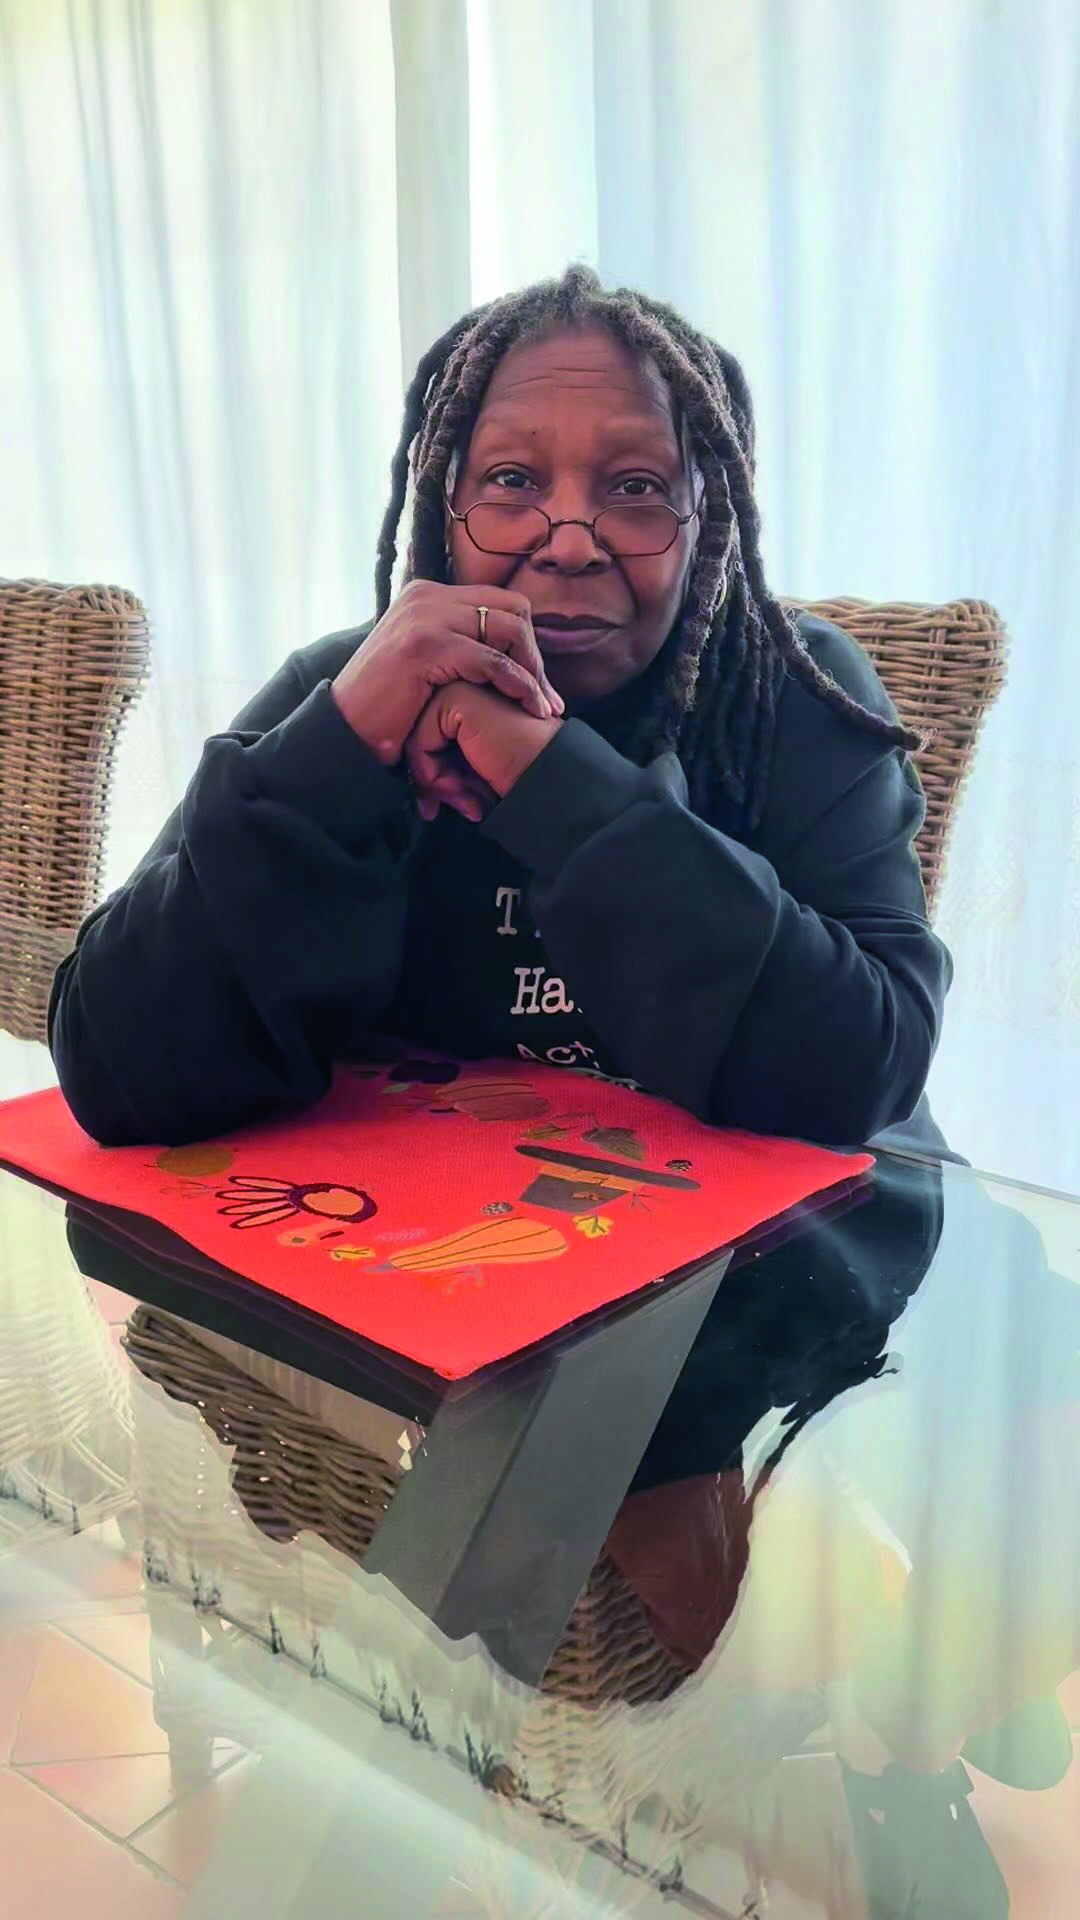 Whoopi says queers may disappear